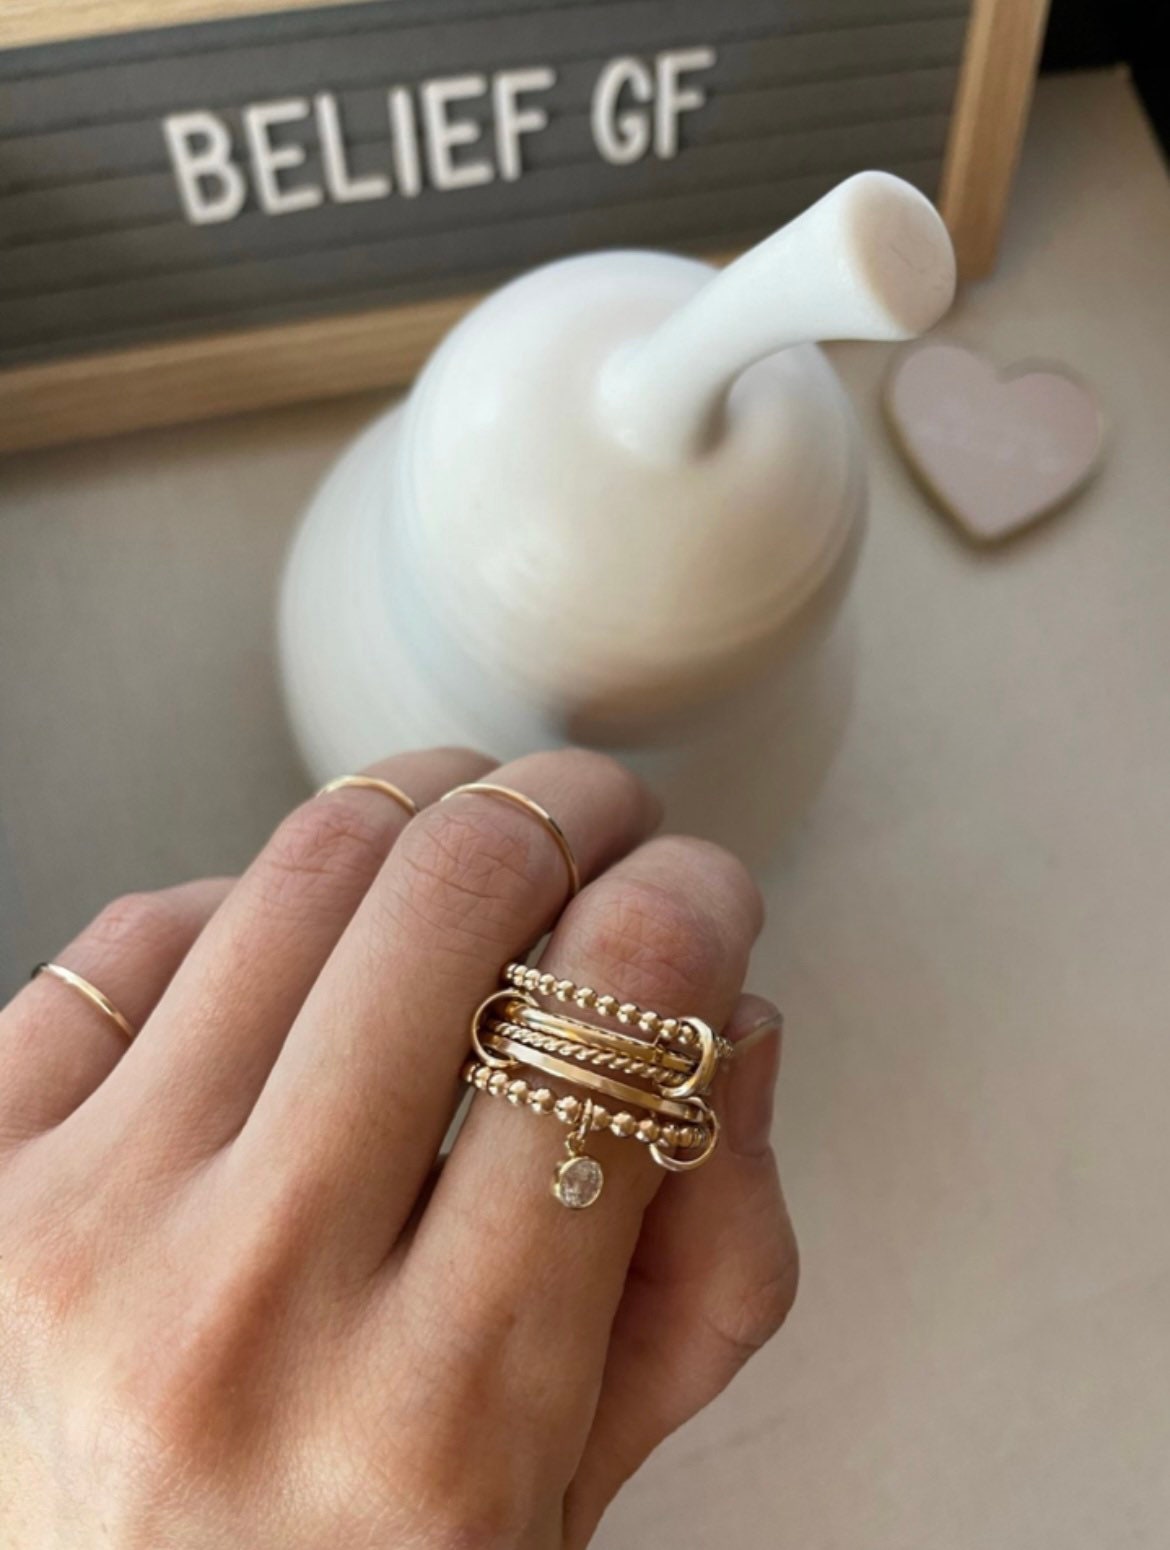 Are chain rings prone to falling more than regular rings? : r/jewelry